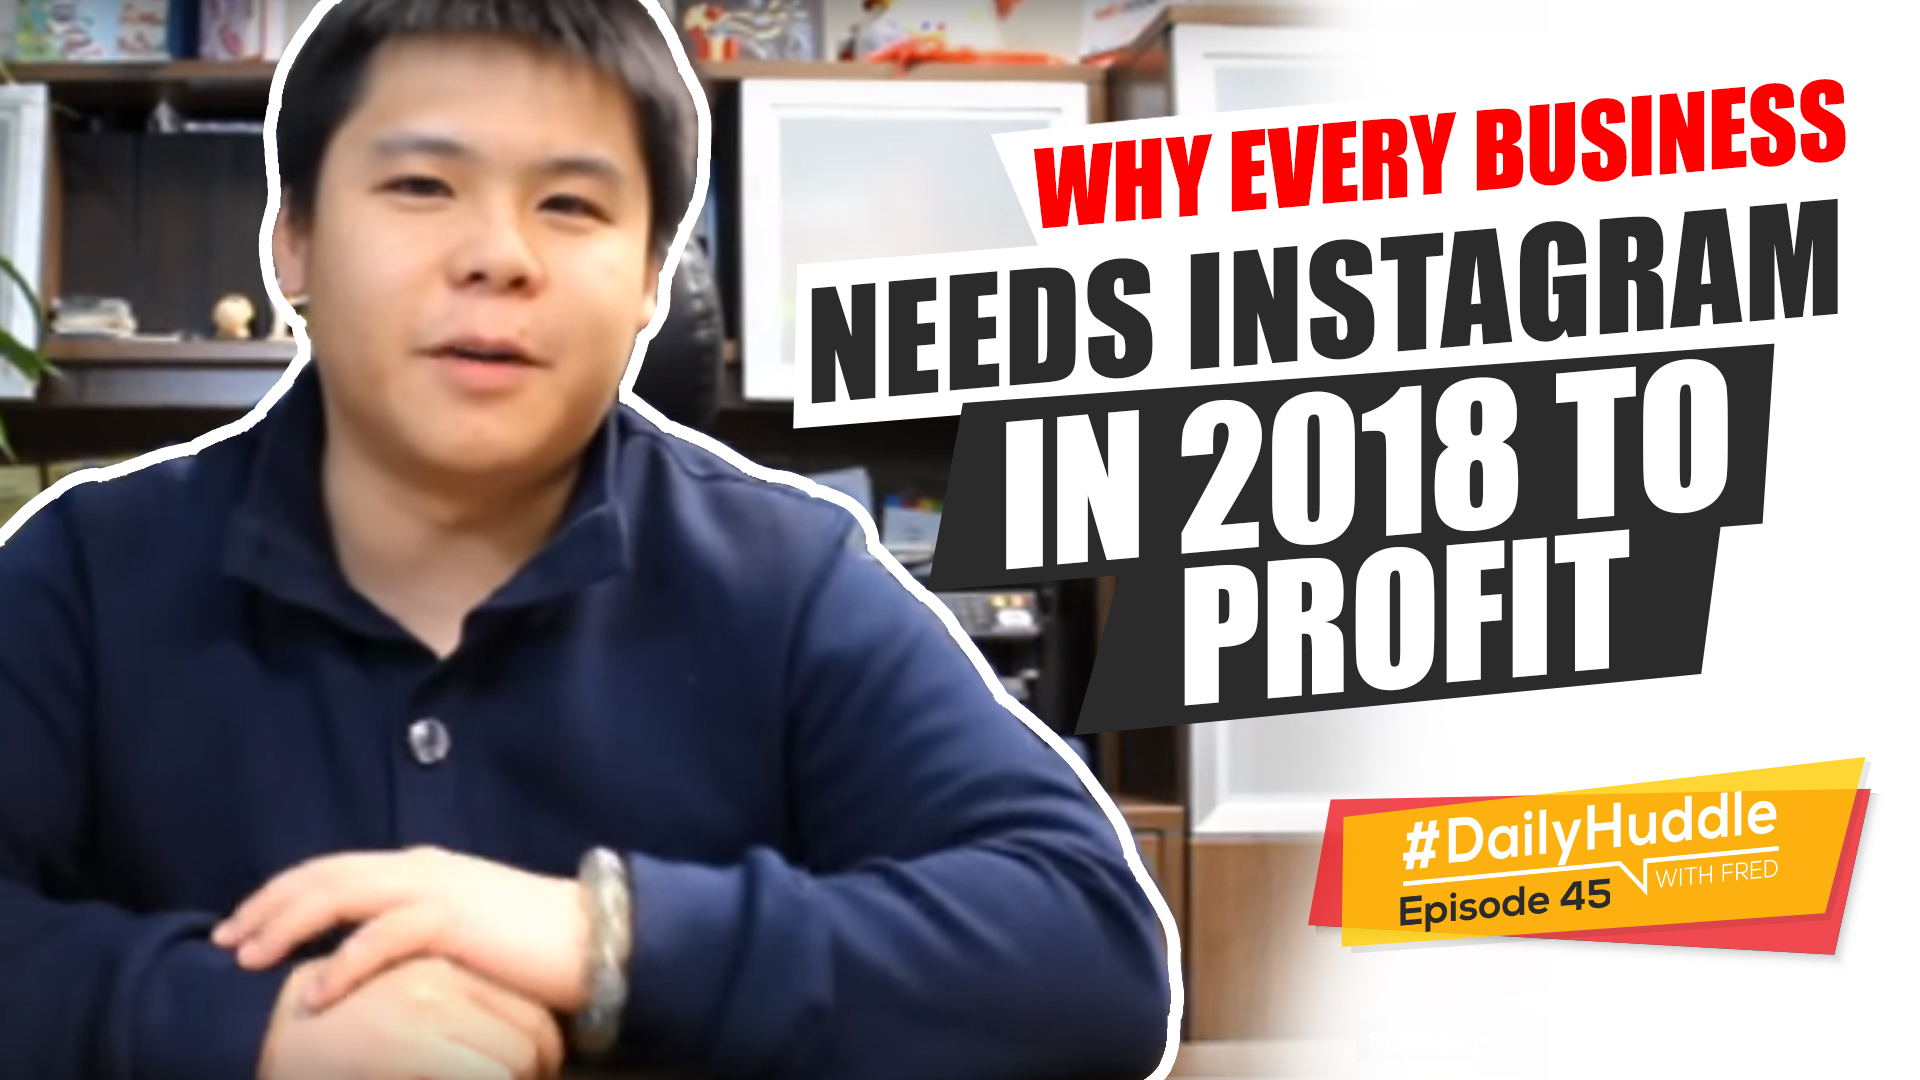 Daily Huddle - Ep 45 | Why Every Business NEEDS Instagram In 2018 To PROFIT